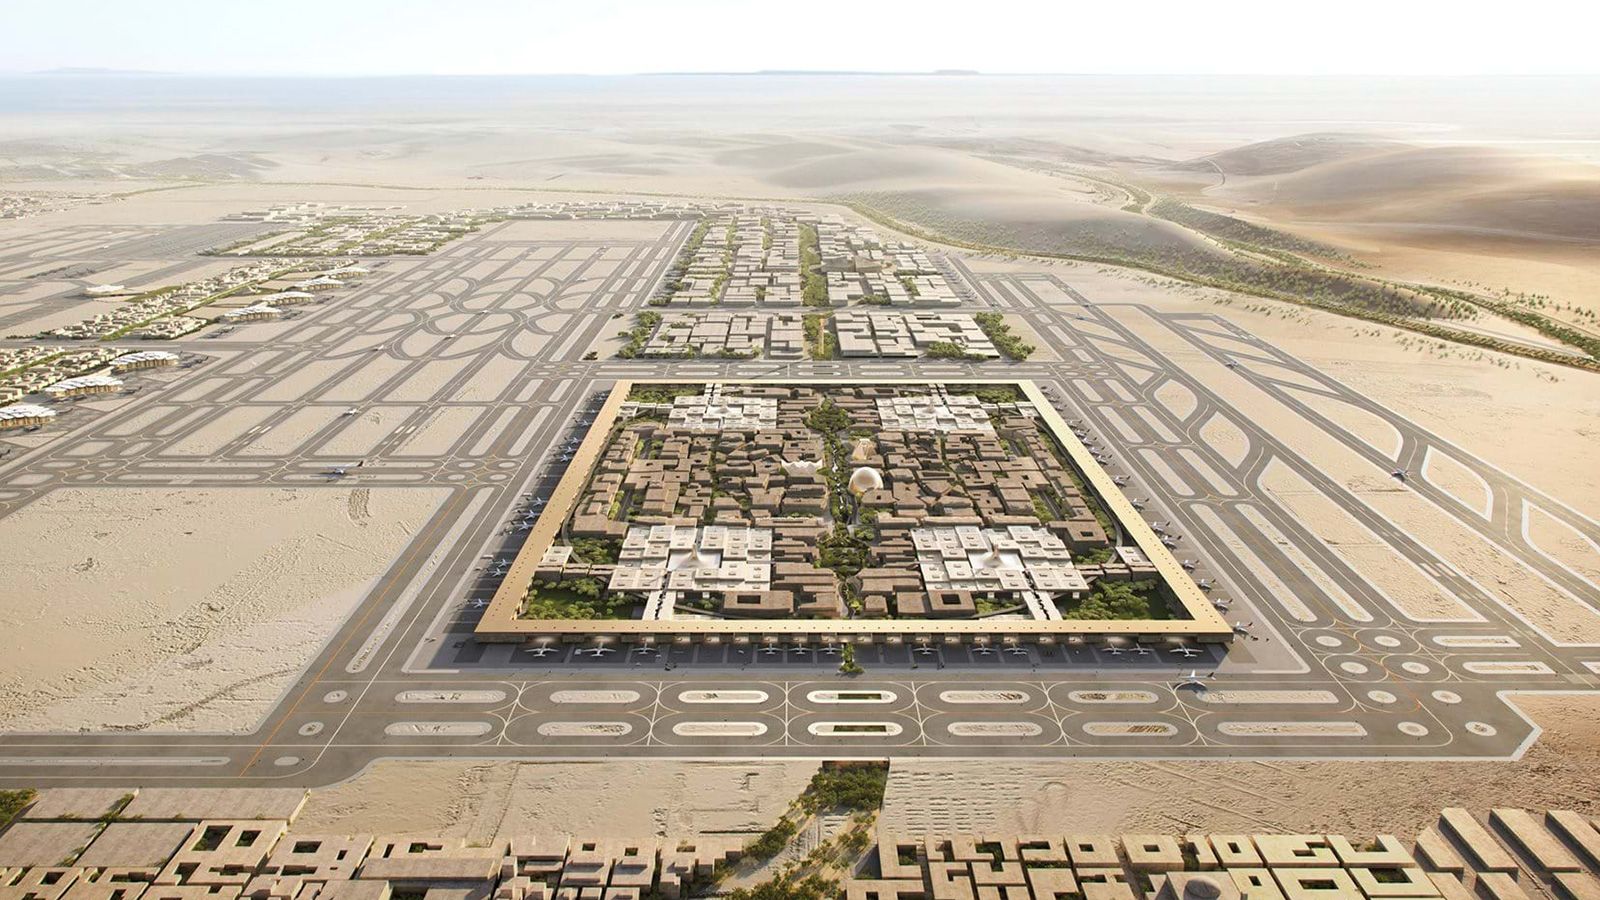 Constructing the World's Largest Airport